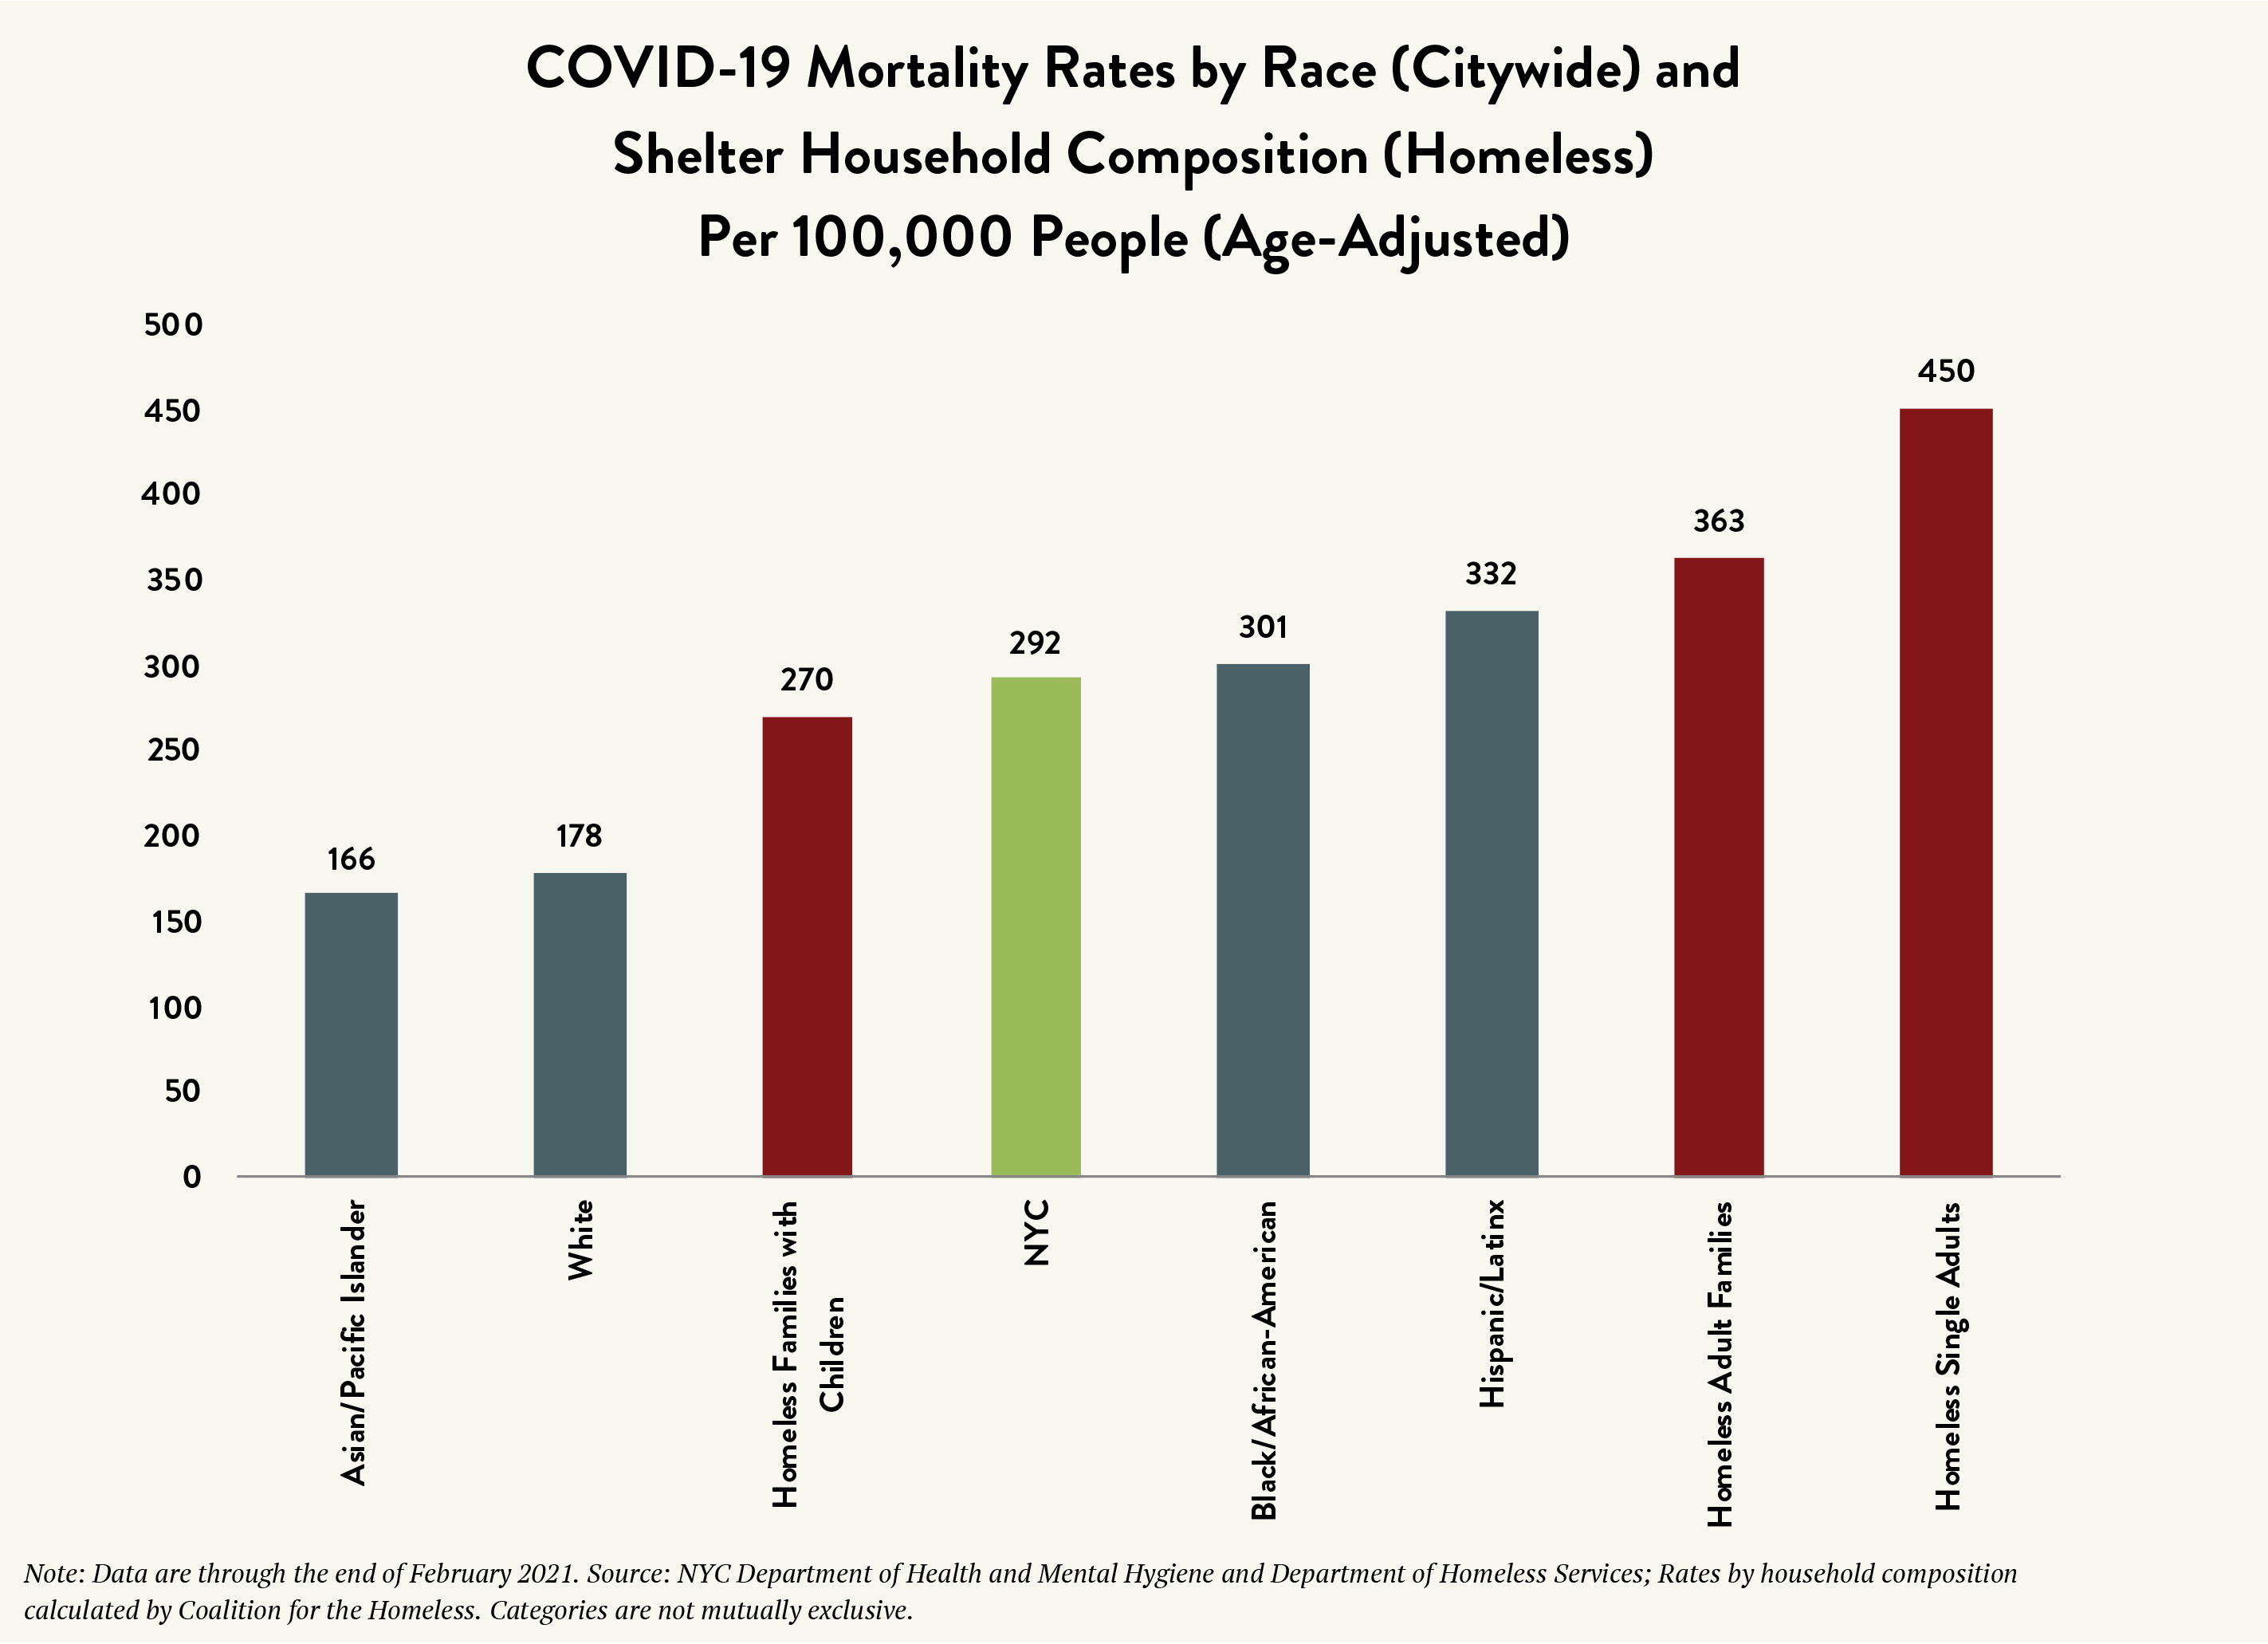 A graph labeled “COVID-19 Mortality Rates by Race (Citywide) and Shelter Household Composition (Homeless) Per 100,000 People (Age-Adjusted).” The vertical axis lists numbers 0 to 500 in increments of 50. The horizontal axis shows colored bars with rates per 100,000 for eight population categories from left to right: Two gray bars mark 166 for Asian/Pacific Islander and 178 for White; a dark red bar marks 270 for Homeless Families with Children; a green bar marks 292 for NYC; two gray bars mark 301 for Black/African-American and 332 for Hispanic/Latinx; and two dark red bars mark 363 for Homeless Adult Families and 450 for Homeless Single Adults.